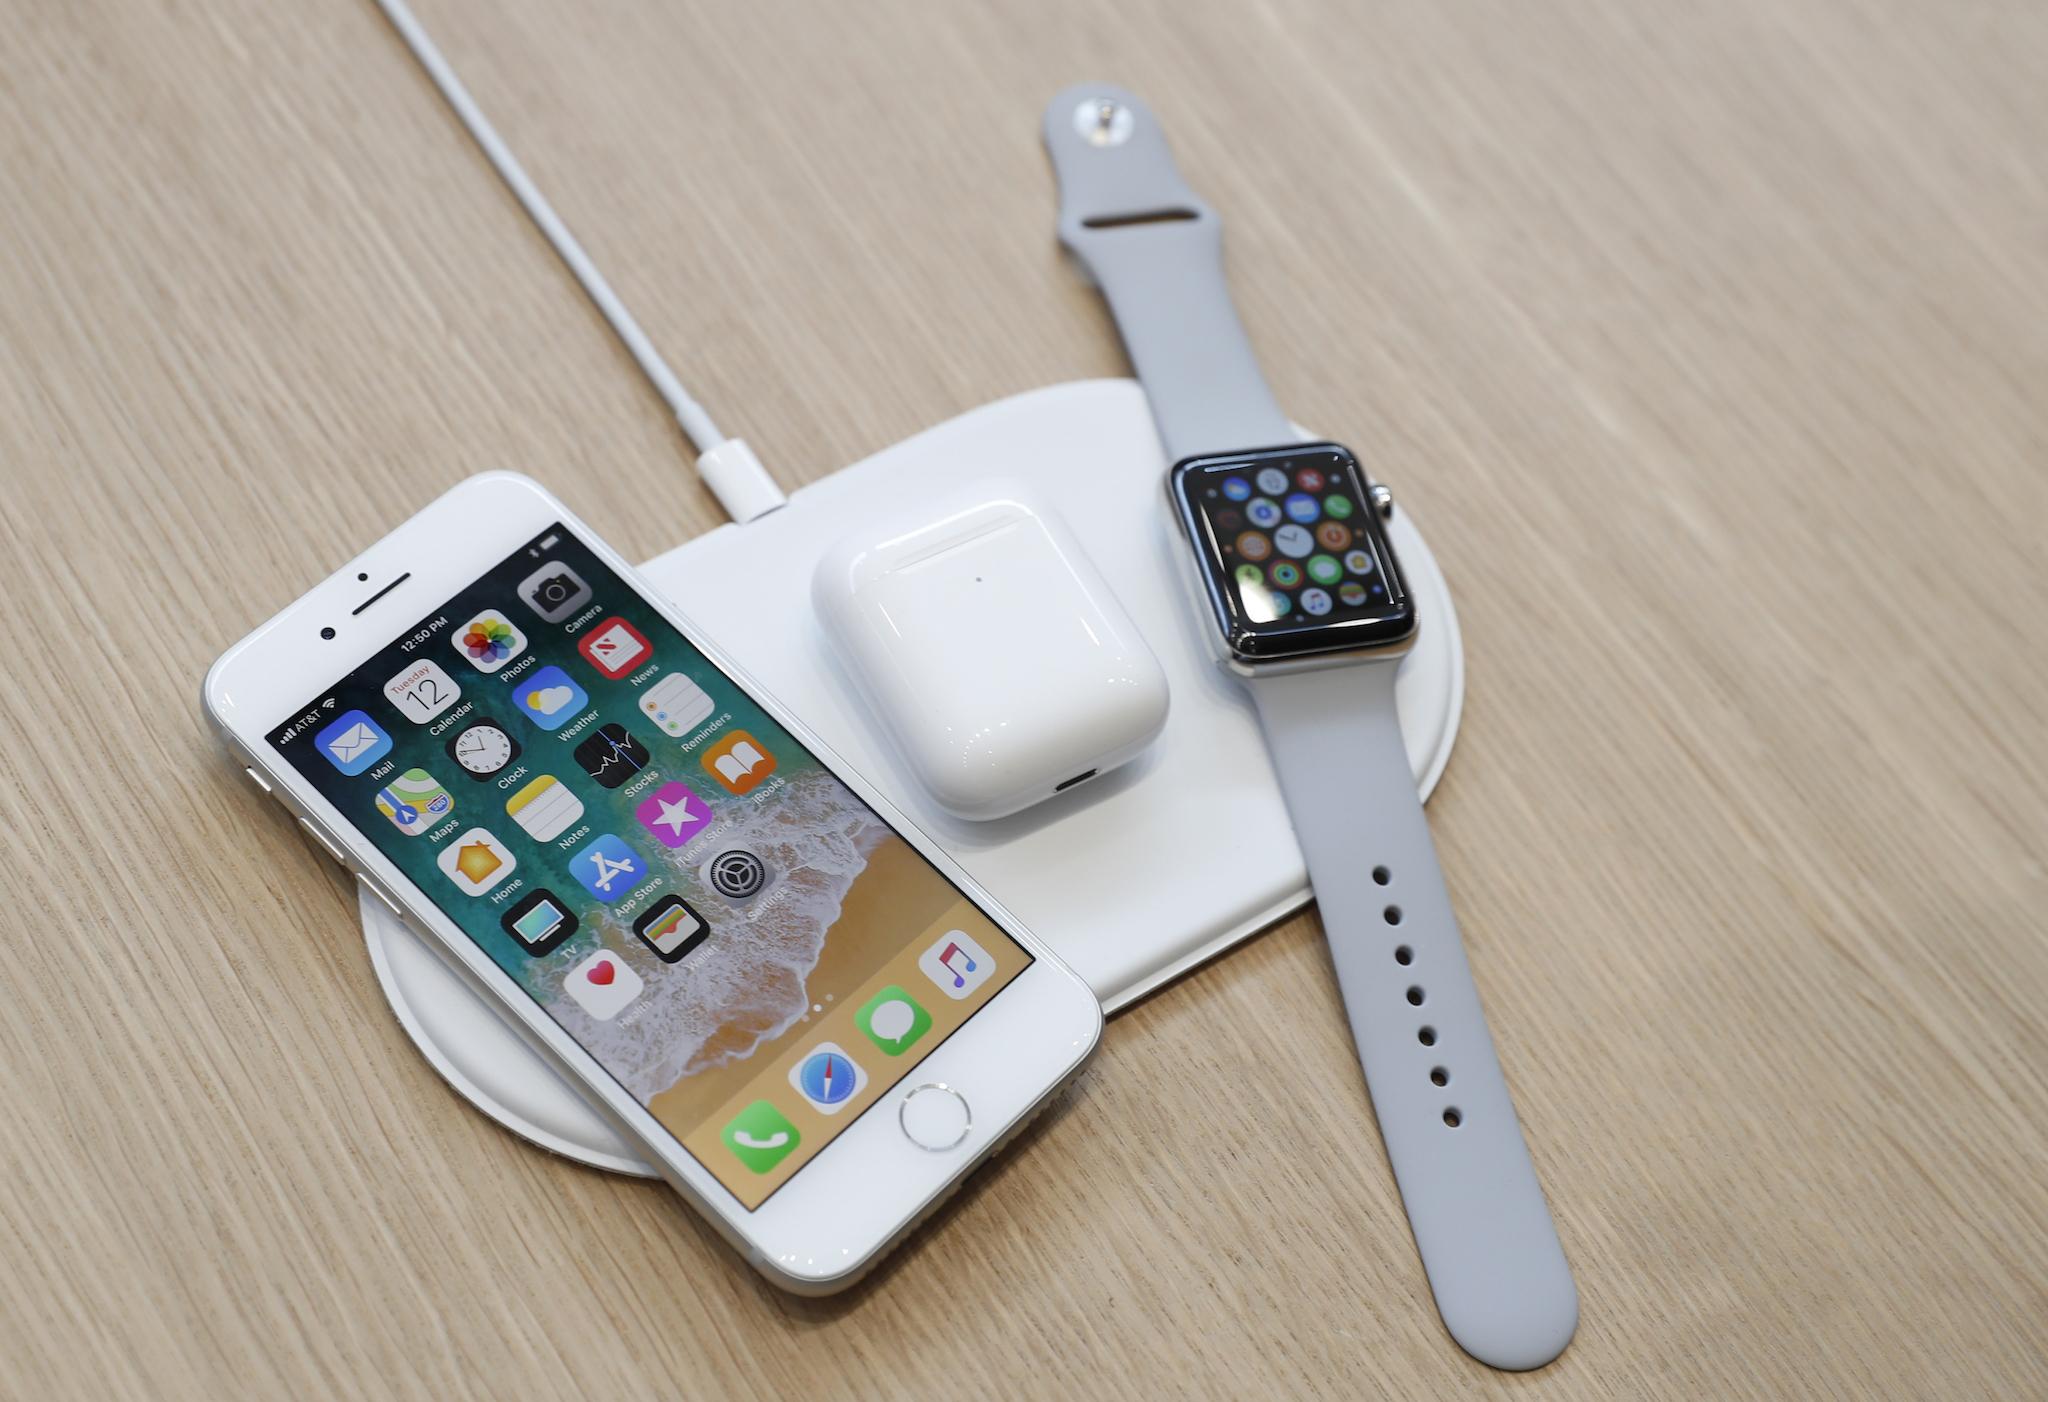 An AirPower wireless charger is displayed along with other products during an Apple launch event in Cupertino, California